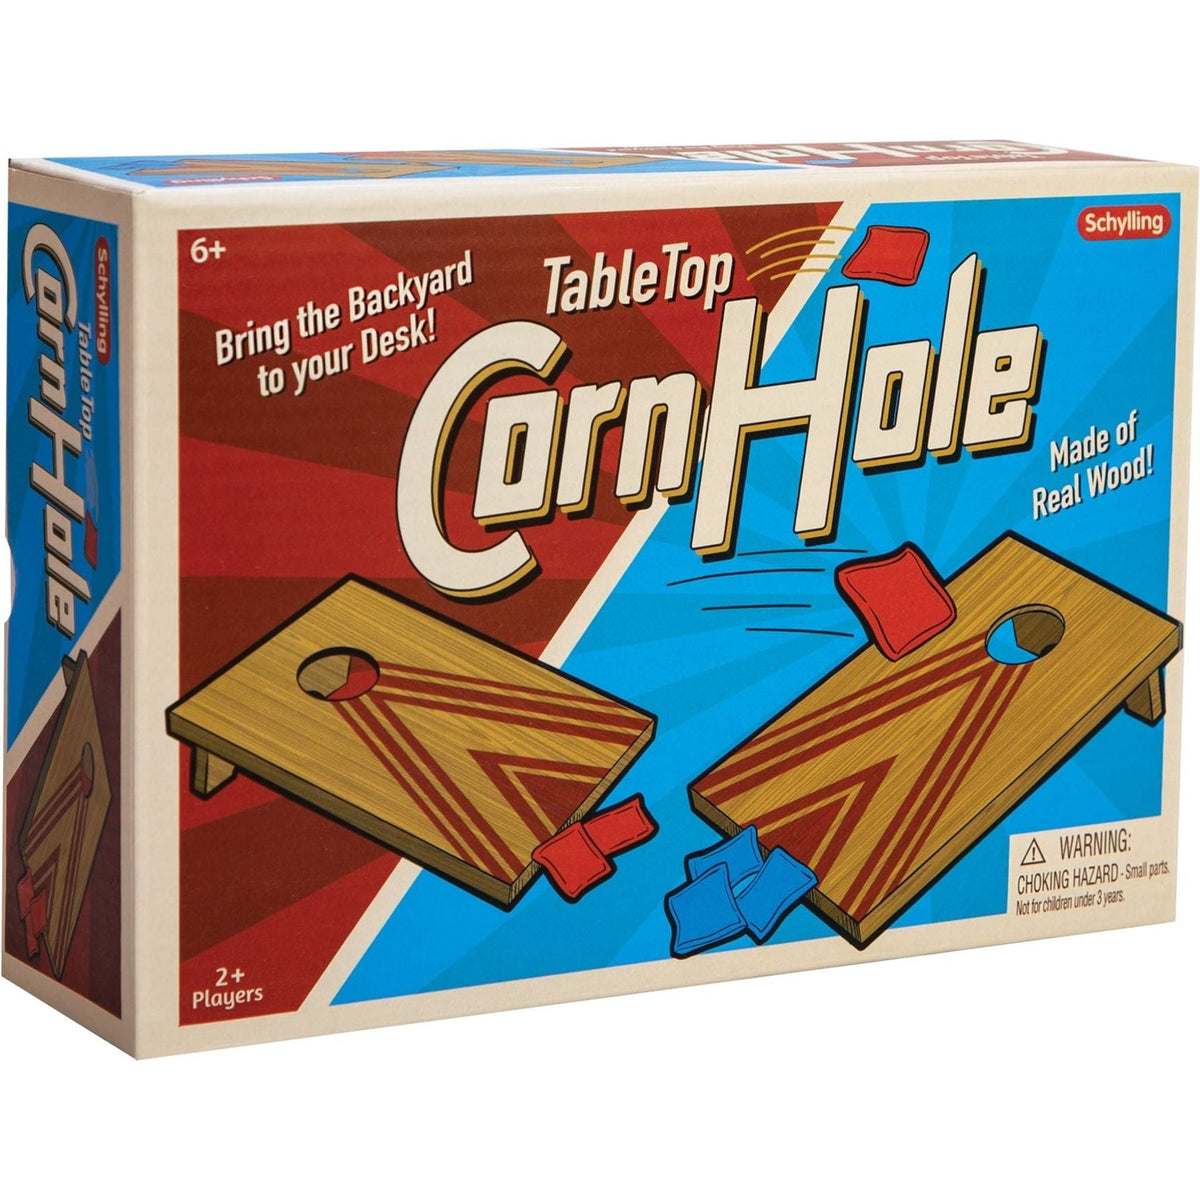 Schylling - Table Top Corn Hole - Toybox Tales